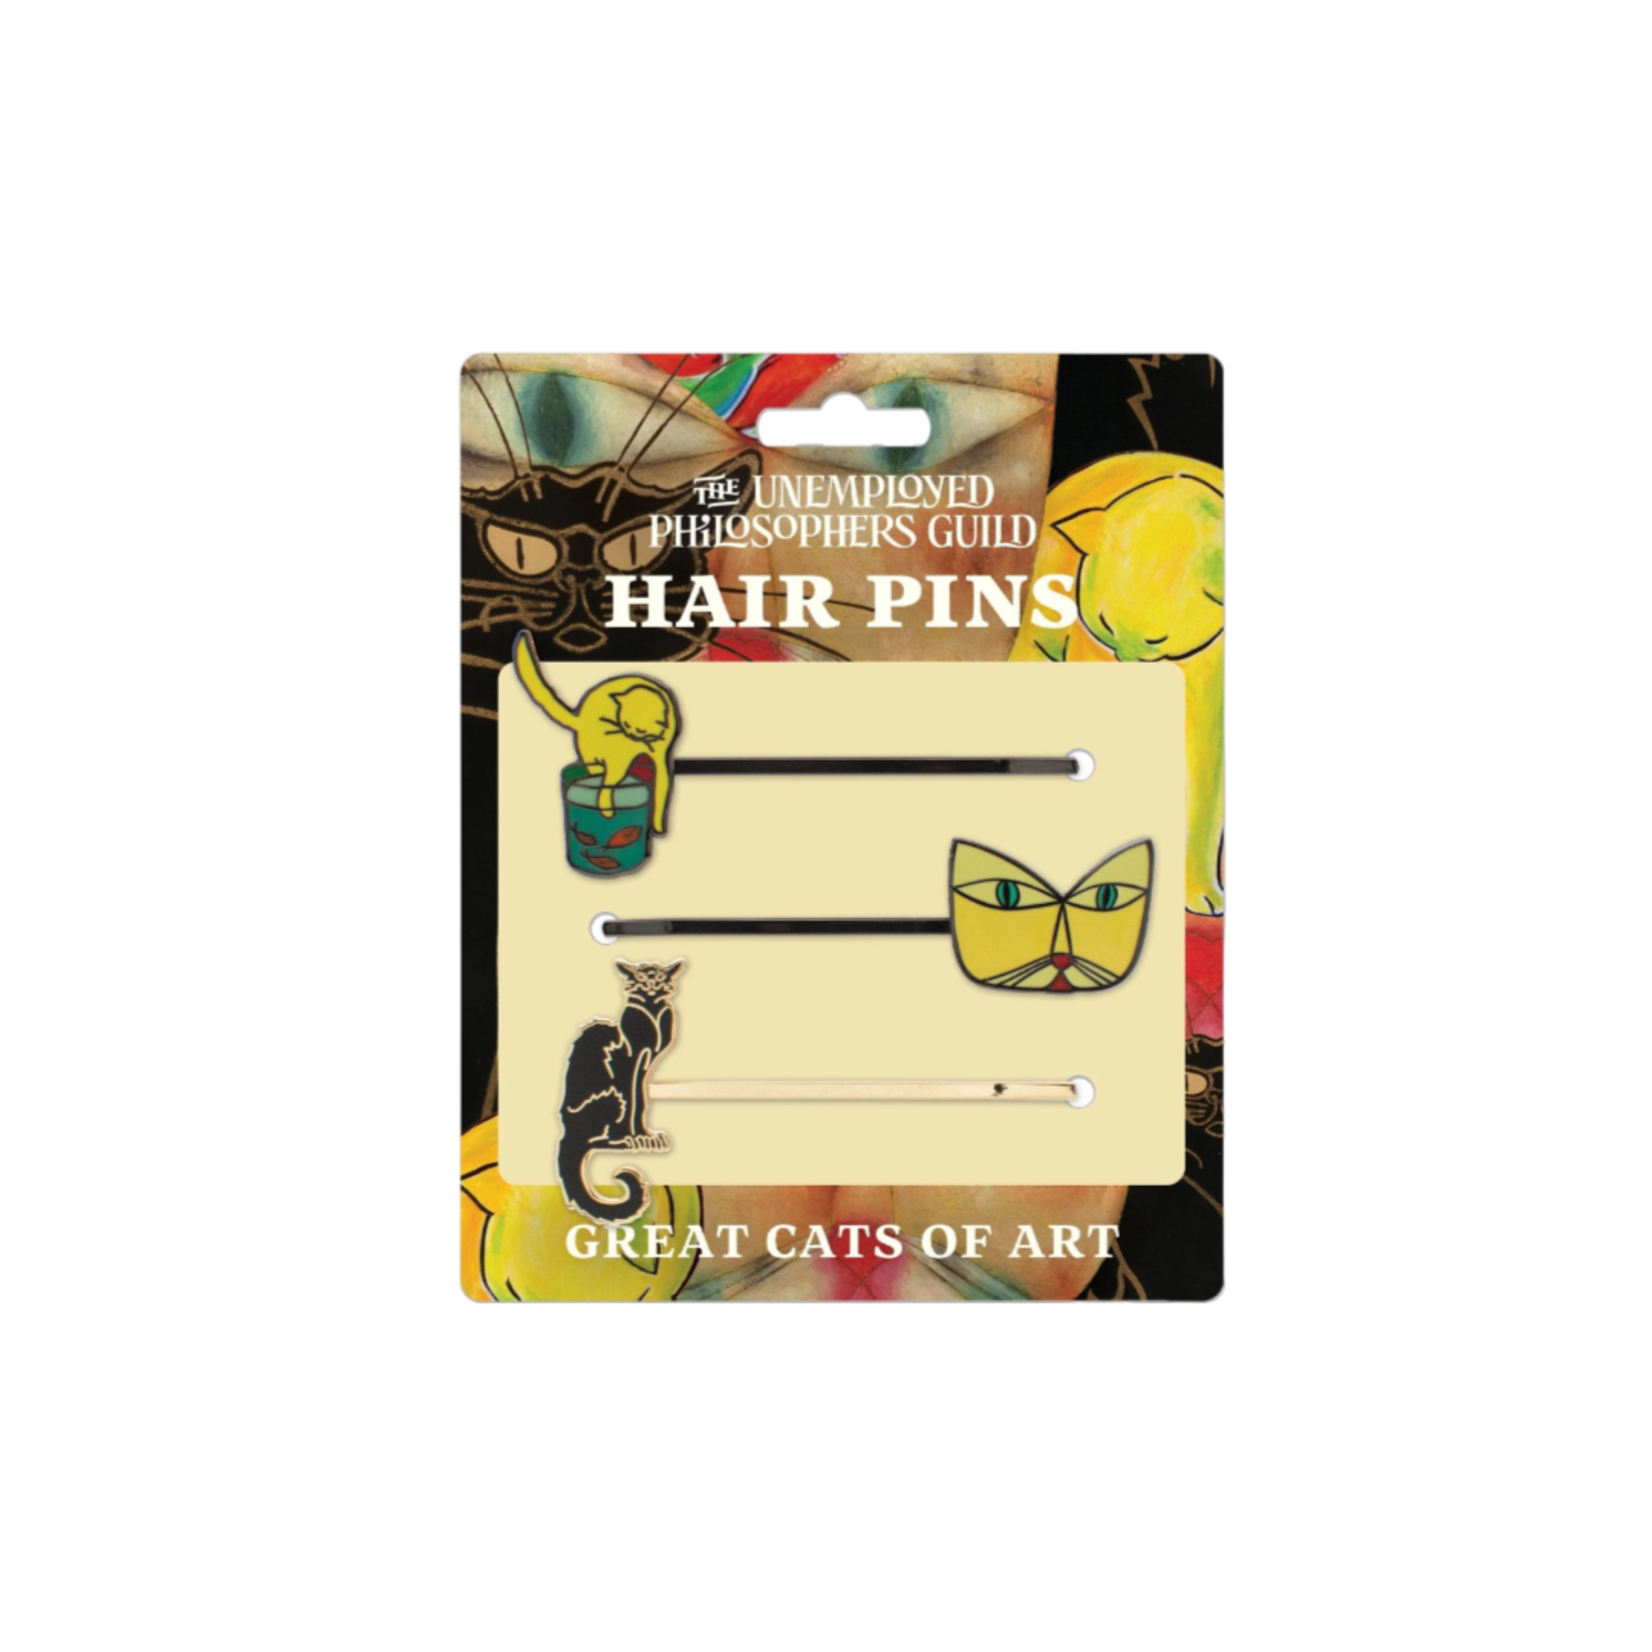 UNEMPLOYED PHILOSOPHERS GUILD GREAT CATS OF ART HAIR PINS